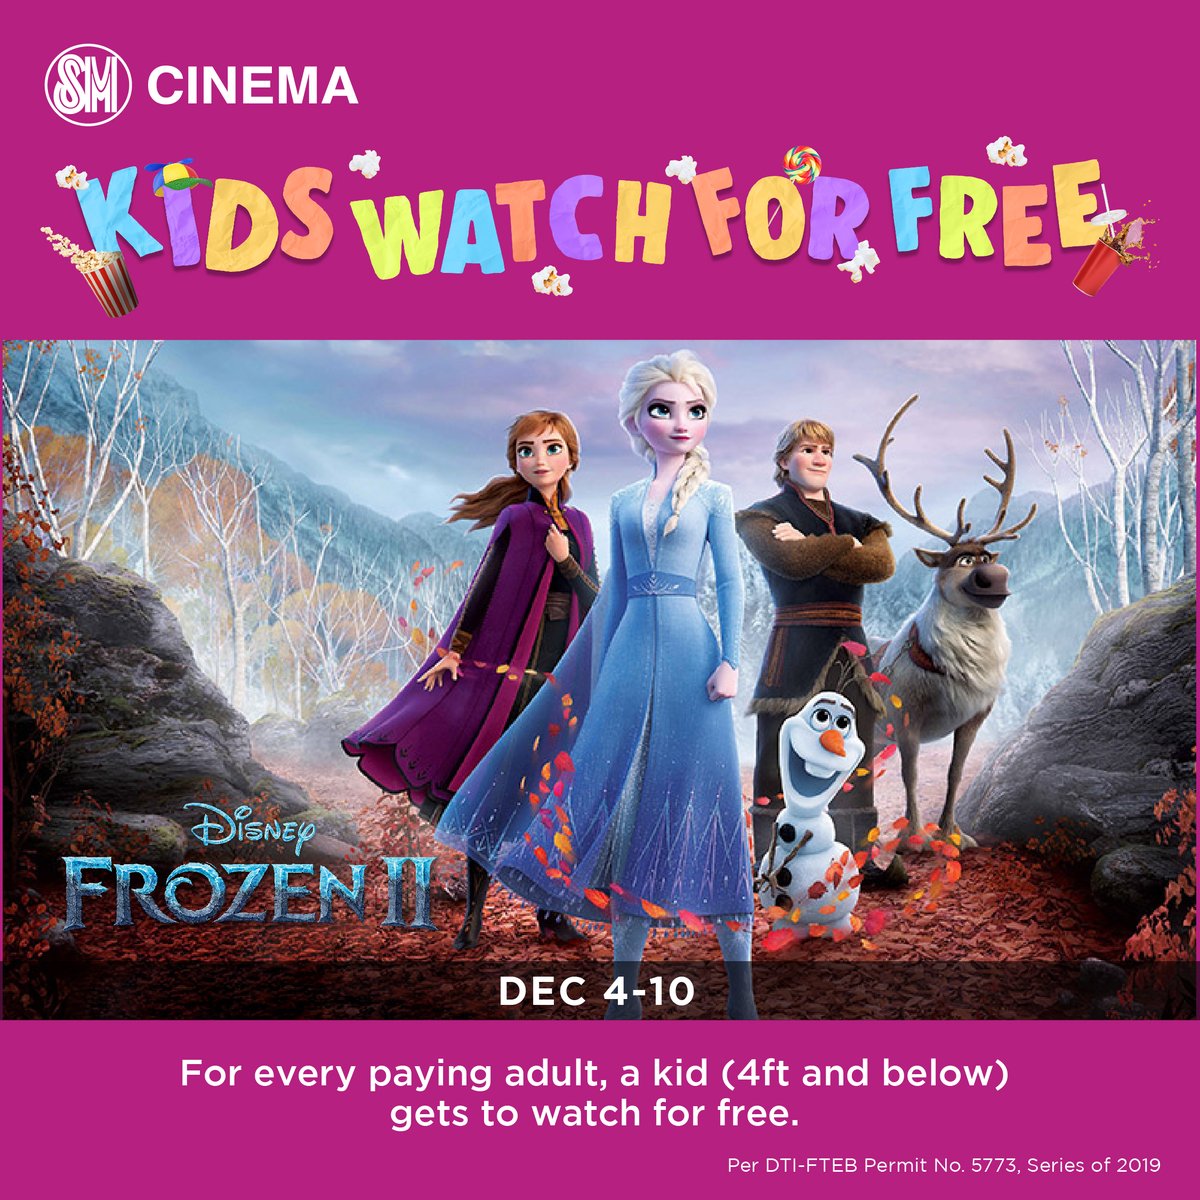 Sm Cinema On Twitter Change Is In The Air Discover The New Tale In Frozen2 As Smcinema Presents Kids Watch For Free Promo See Full Mechanics Here Https T Co Skv5i0jksx List Of Movies And